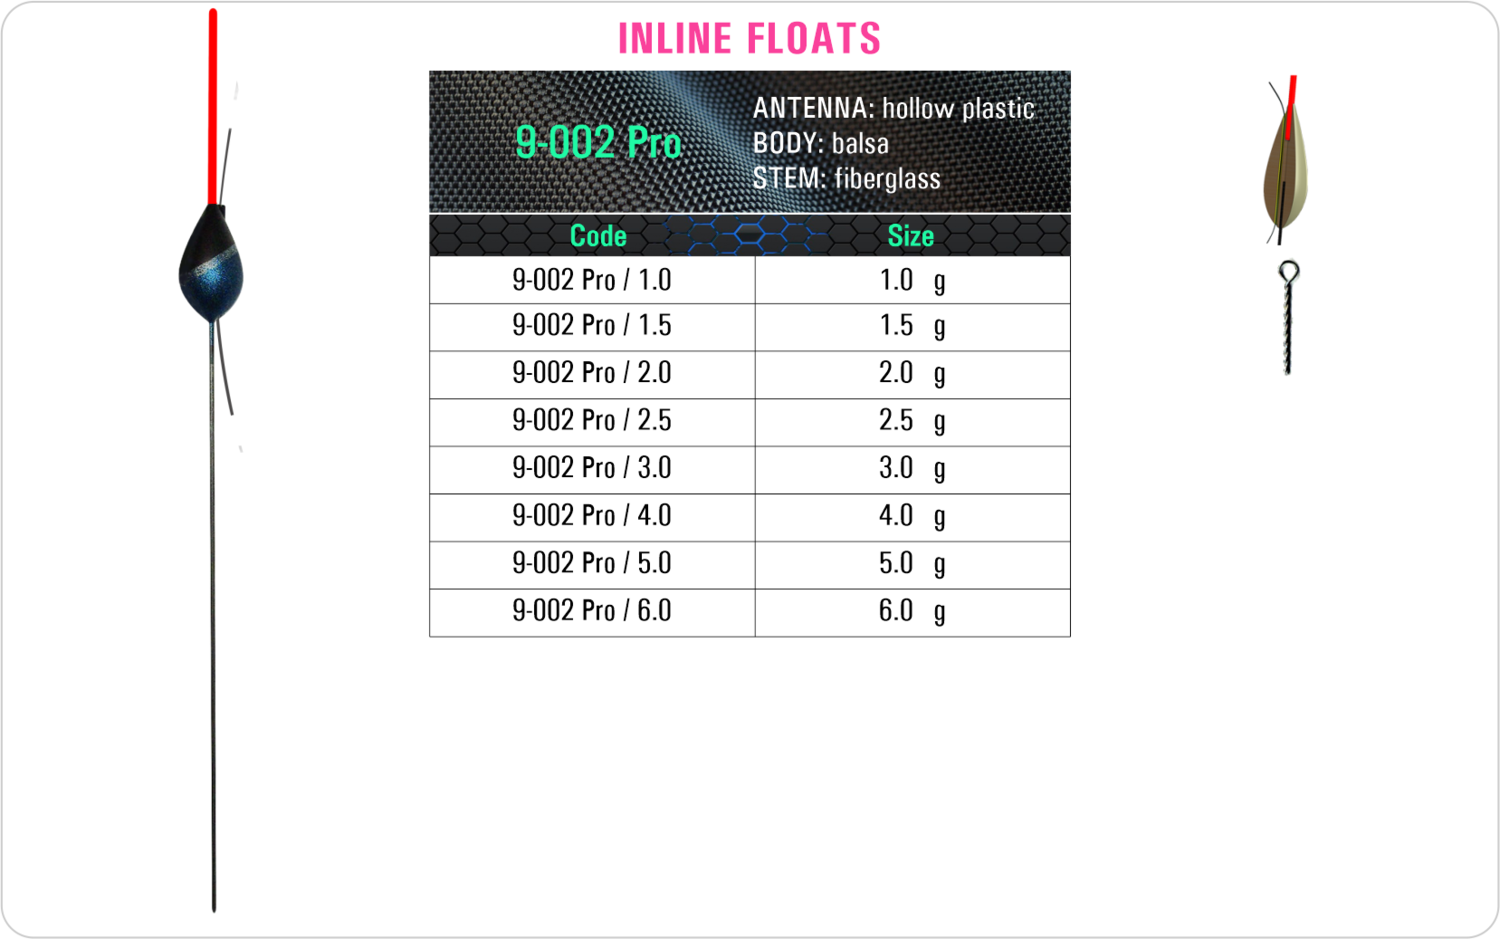 SF 9-002 Pro - Lake and river float model and table containing an additional information about this float with different codes, sizes, types of the body, the stem and the antenna of the float.